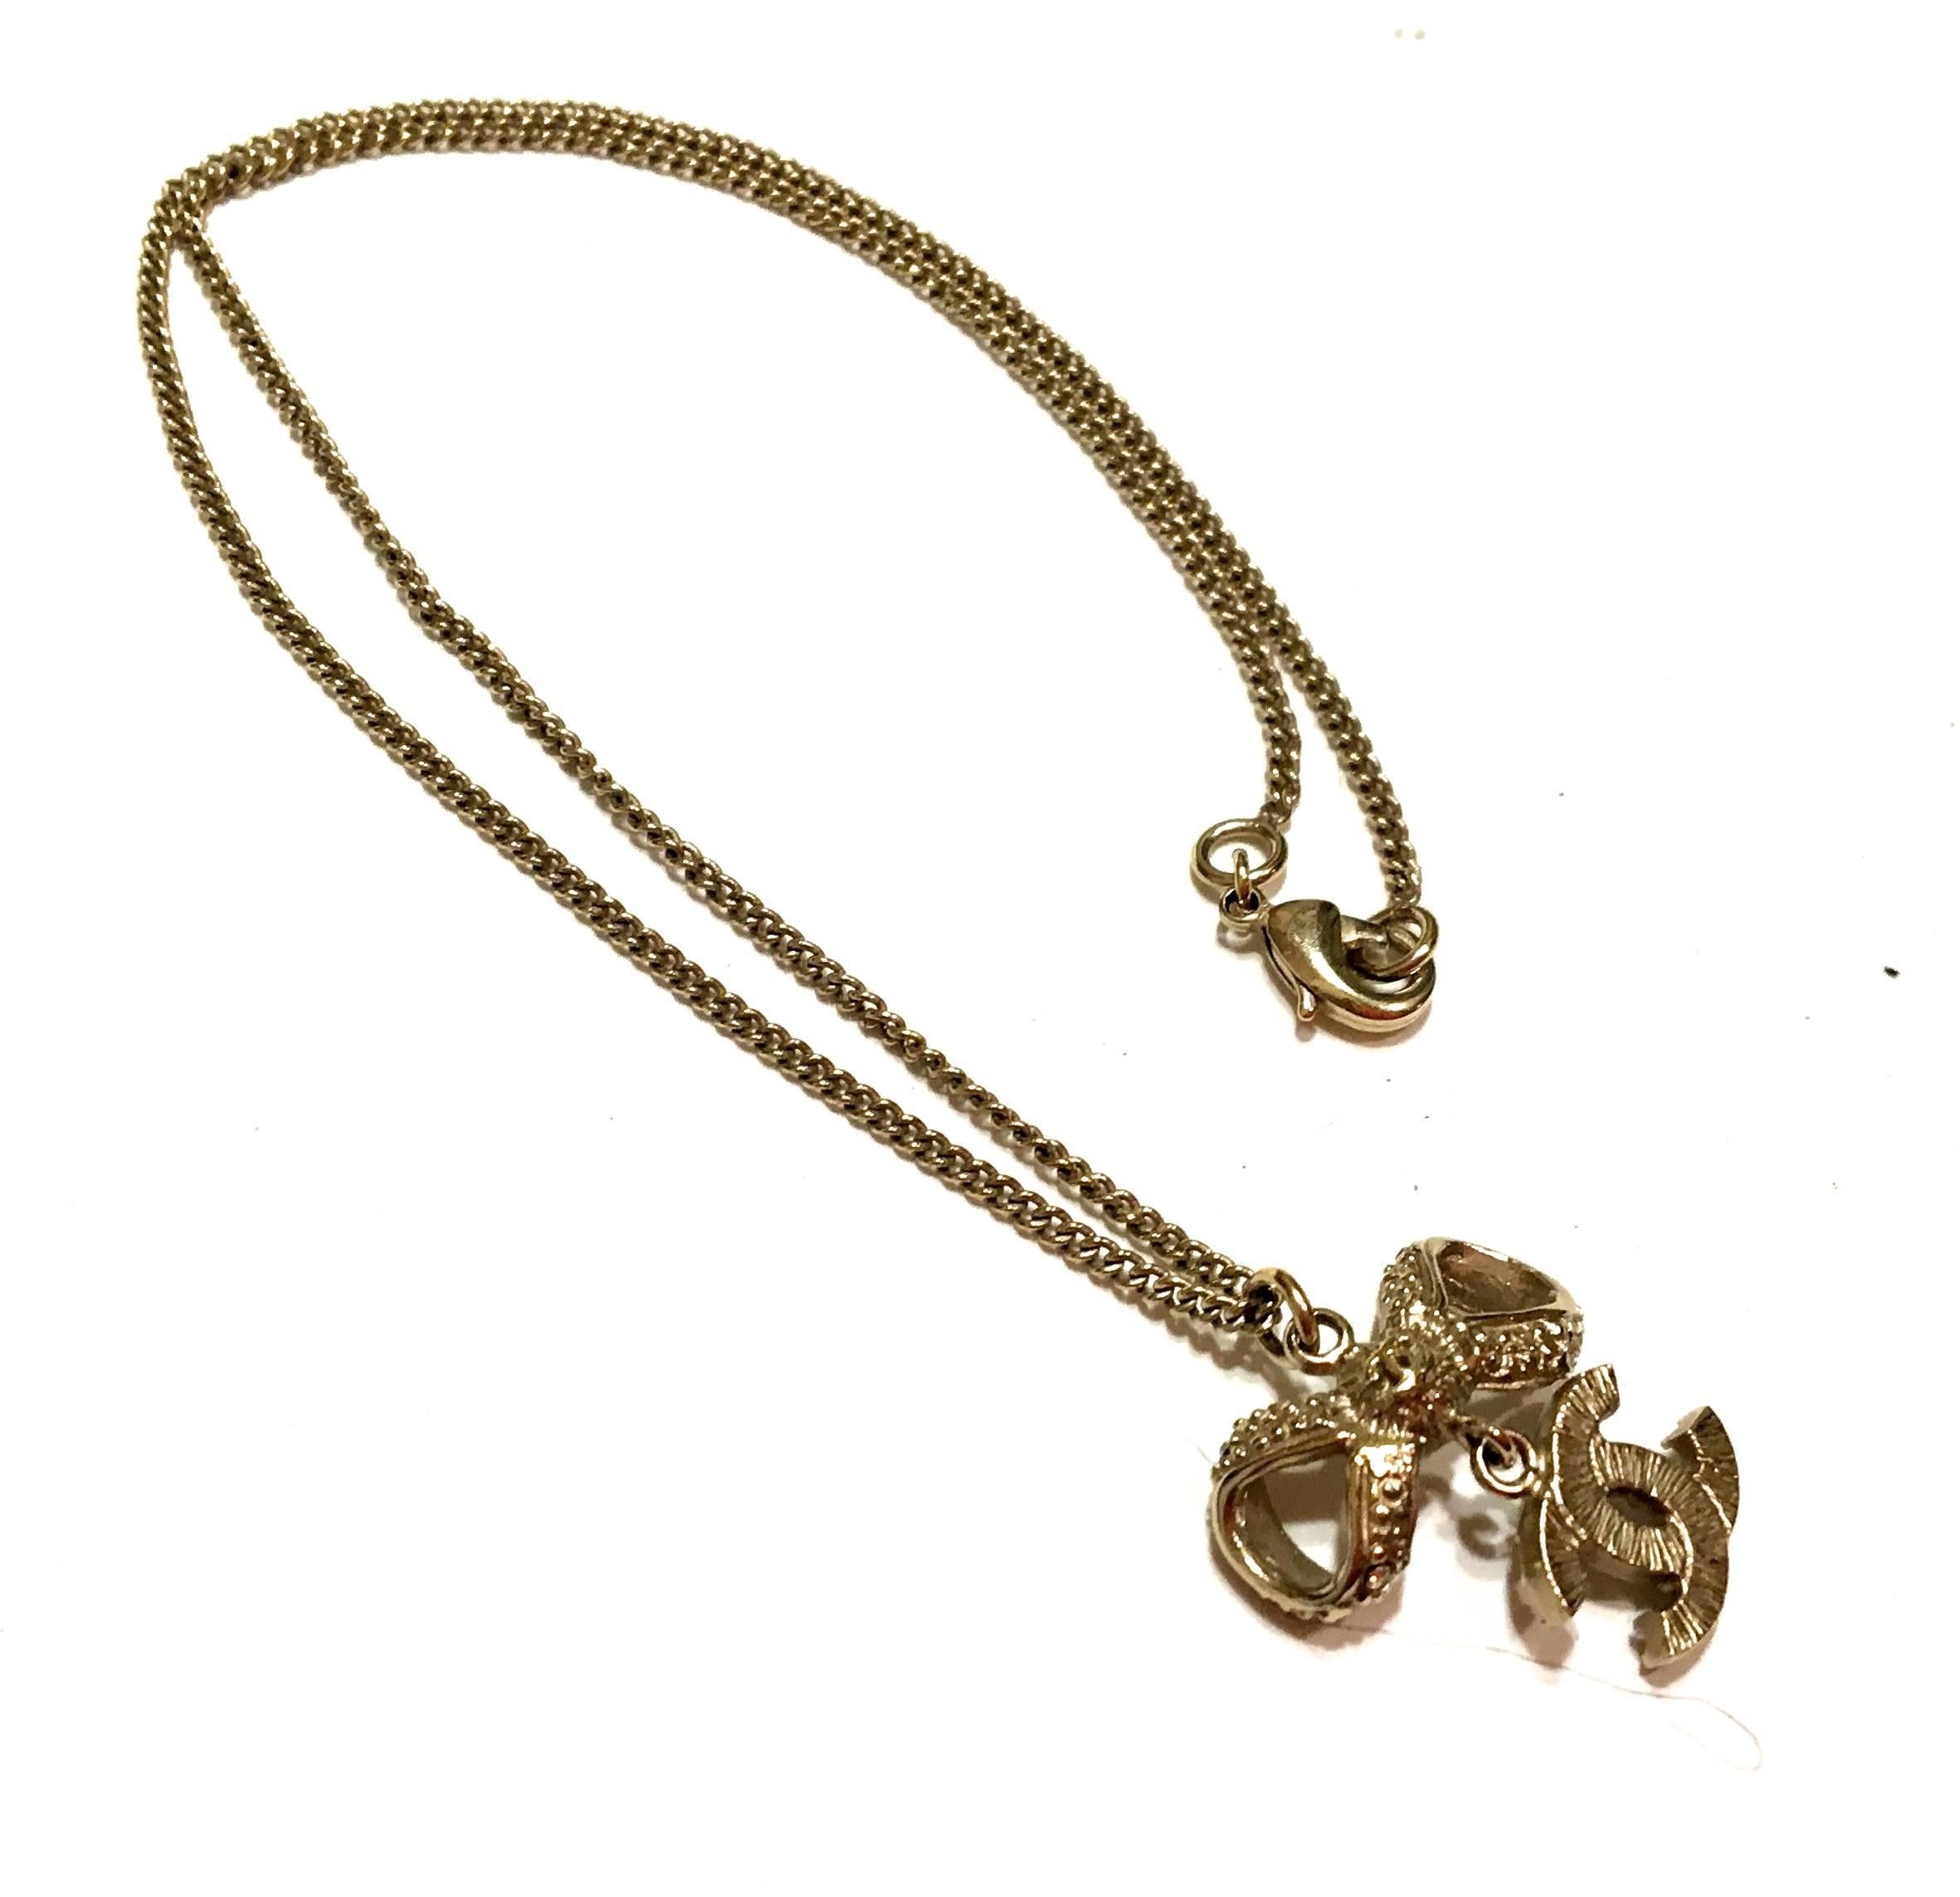 Chanel Necklace - Gold Tone Metal - Bow with CC Logo Charm For Sale 1